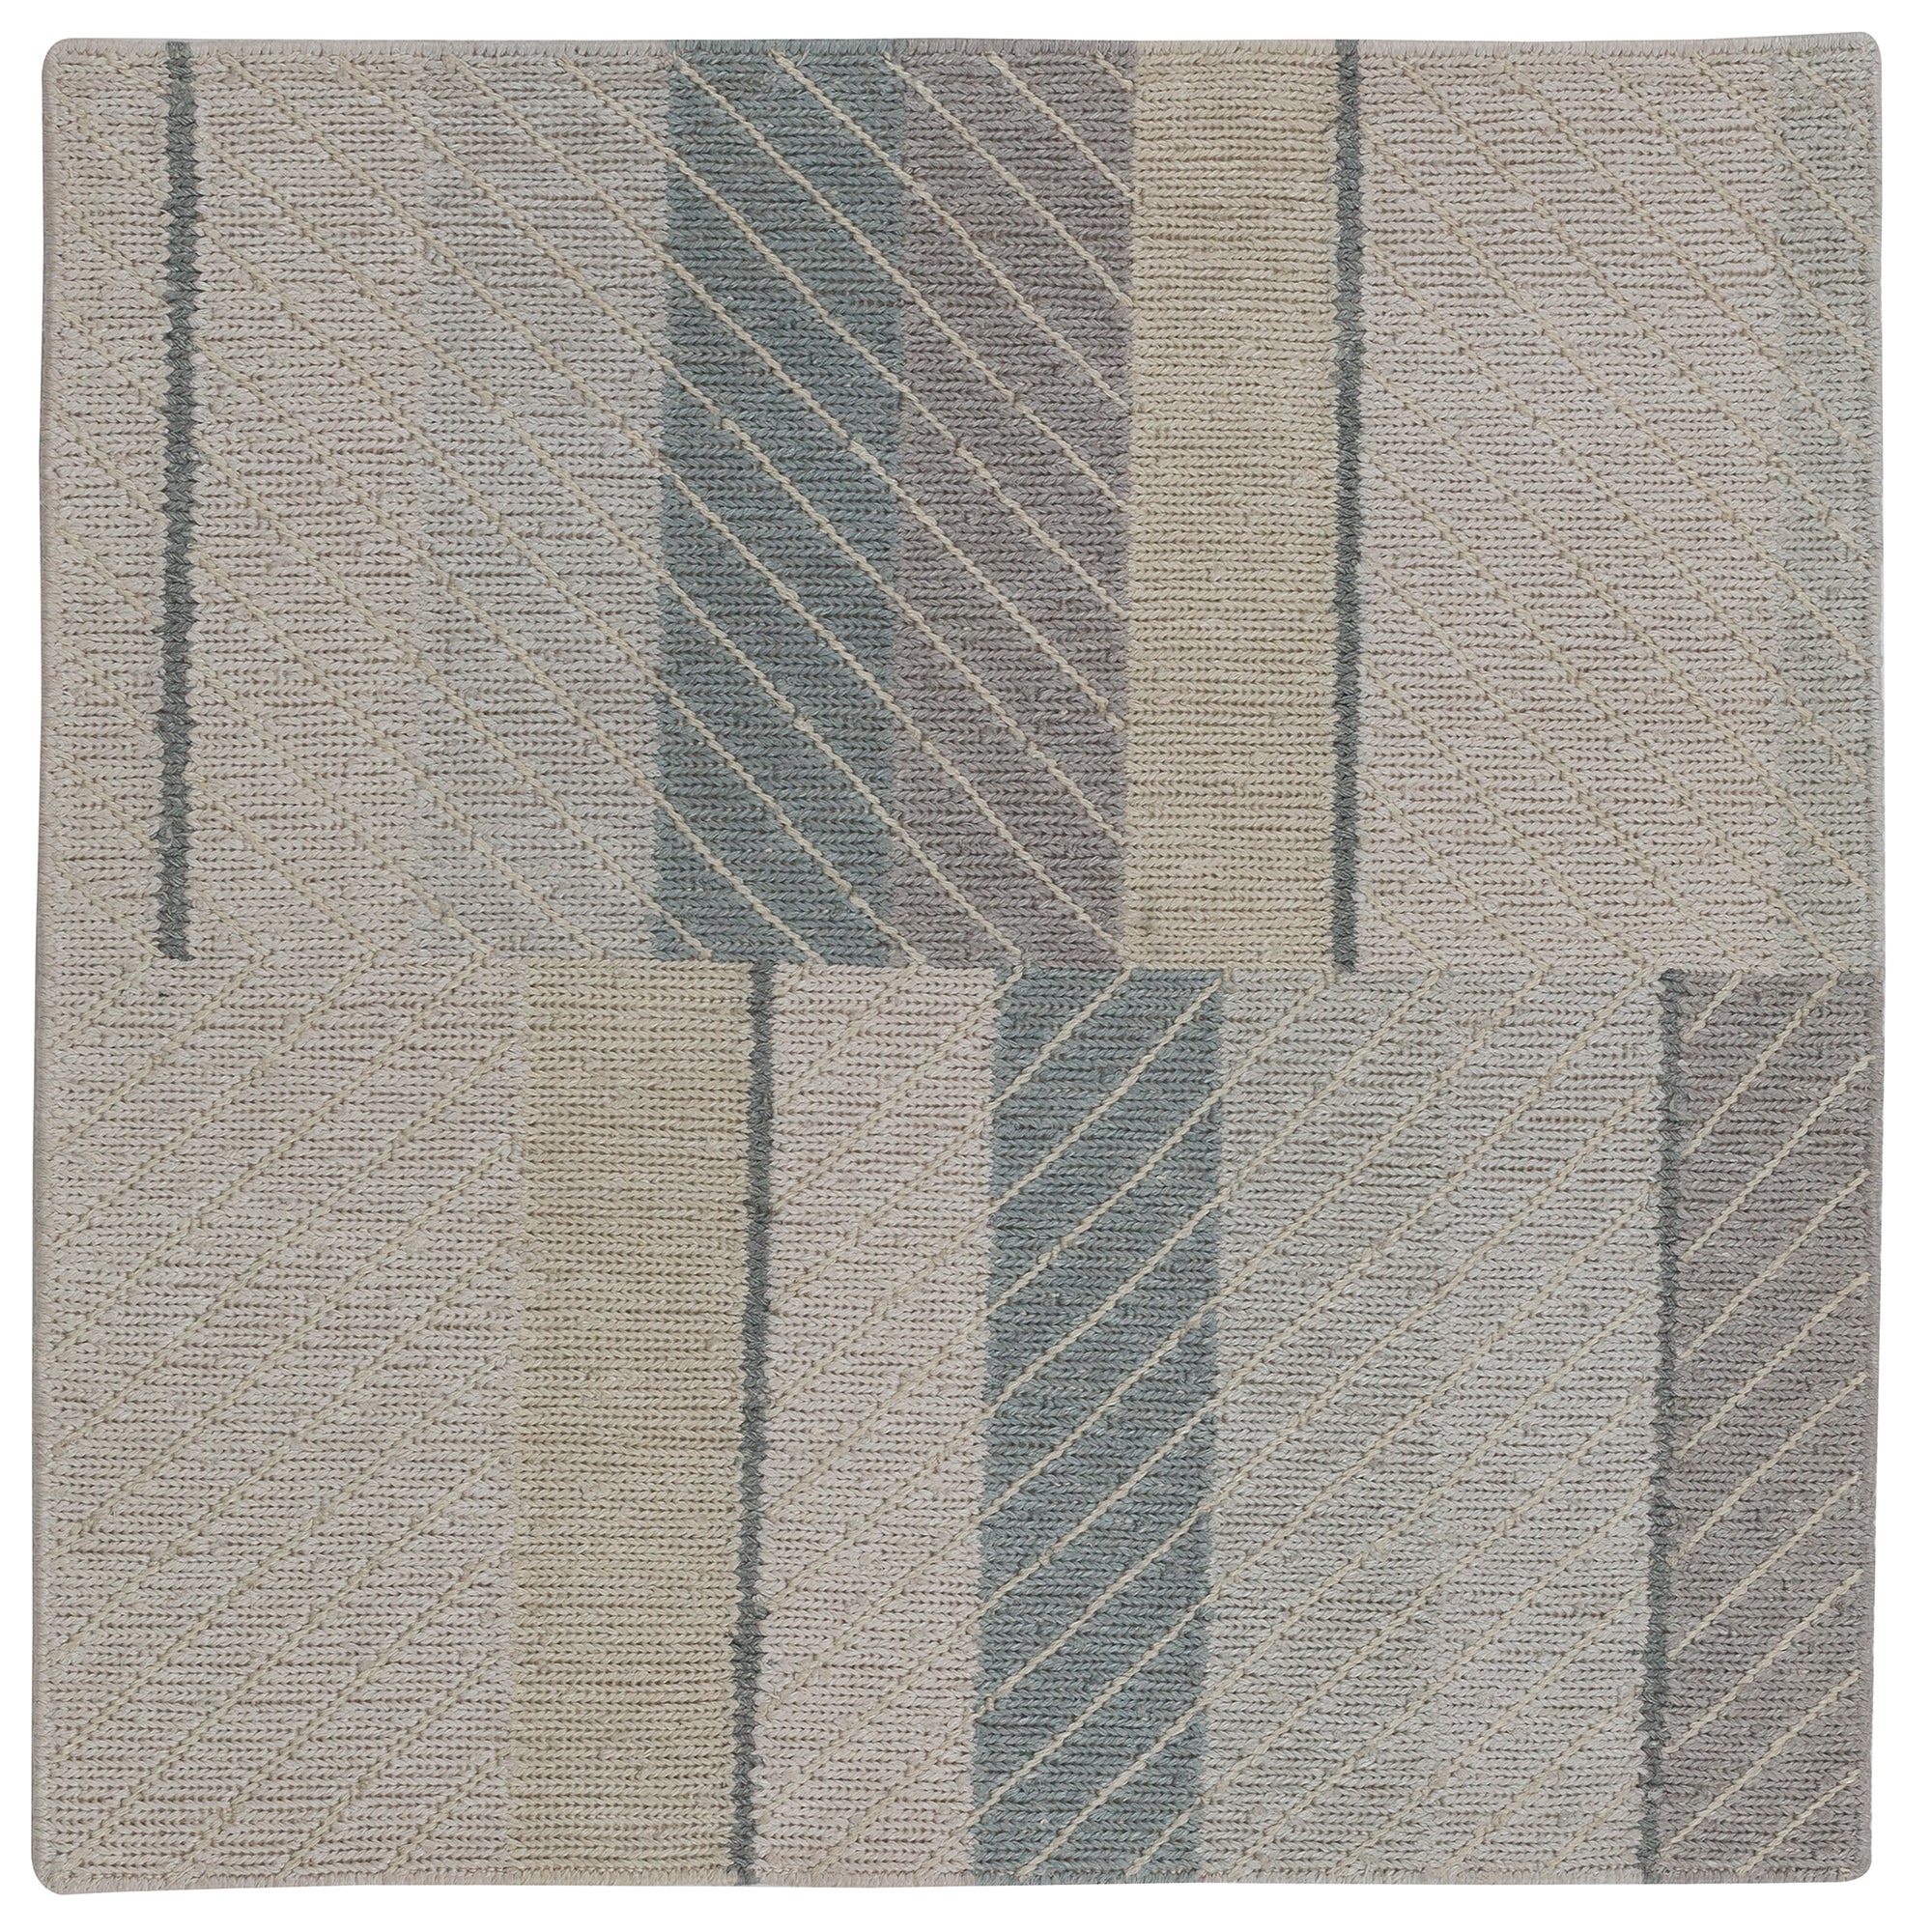 Detail of the Amelia Rug in Pearl featuring a minimalist broken stripe pattern, overlayed with thin white diagonal lines. The broken stripes are a mix of pale blues, grey, and turquoise with slate grey accents, all on a pale grey field. 